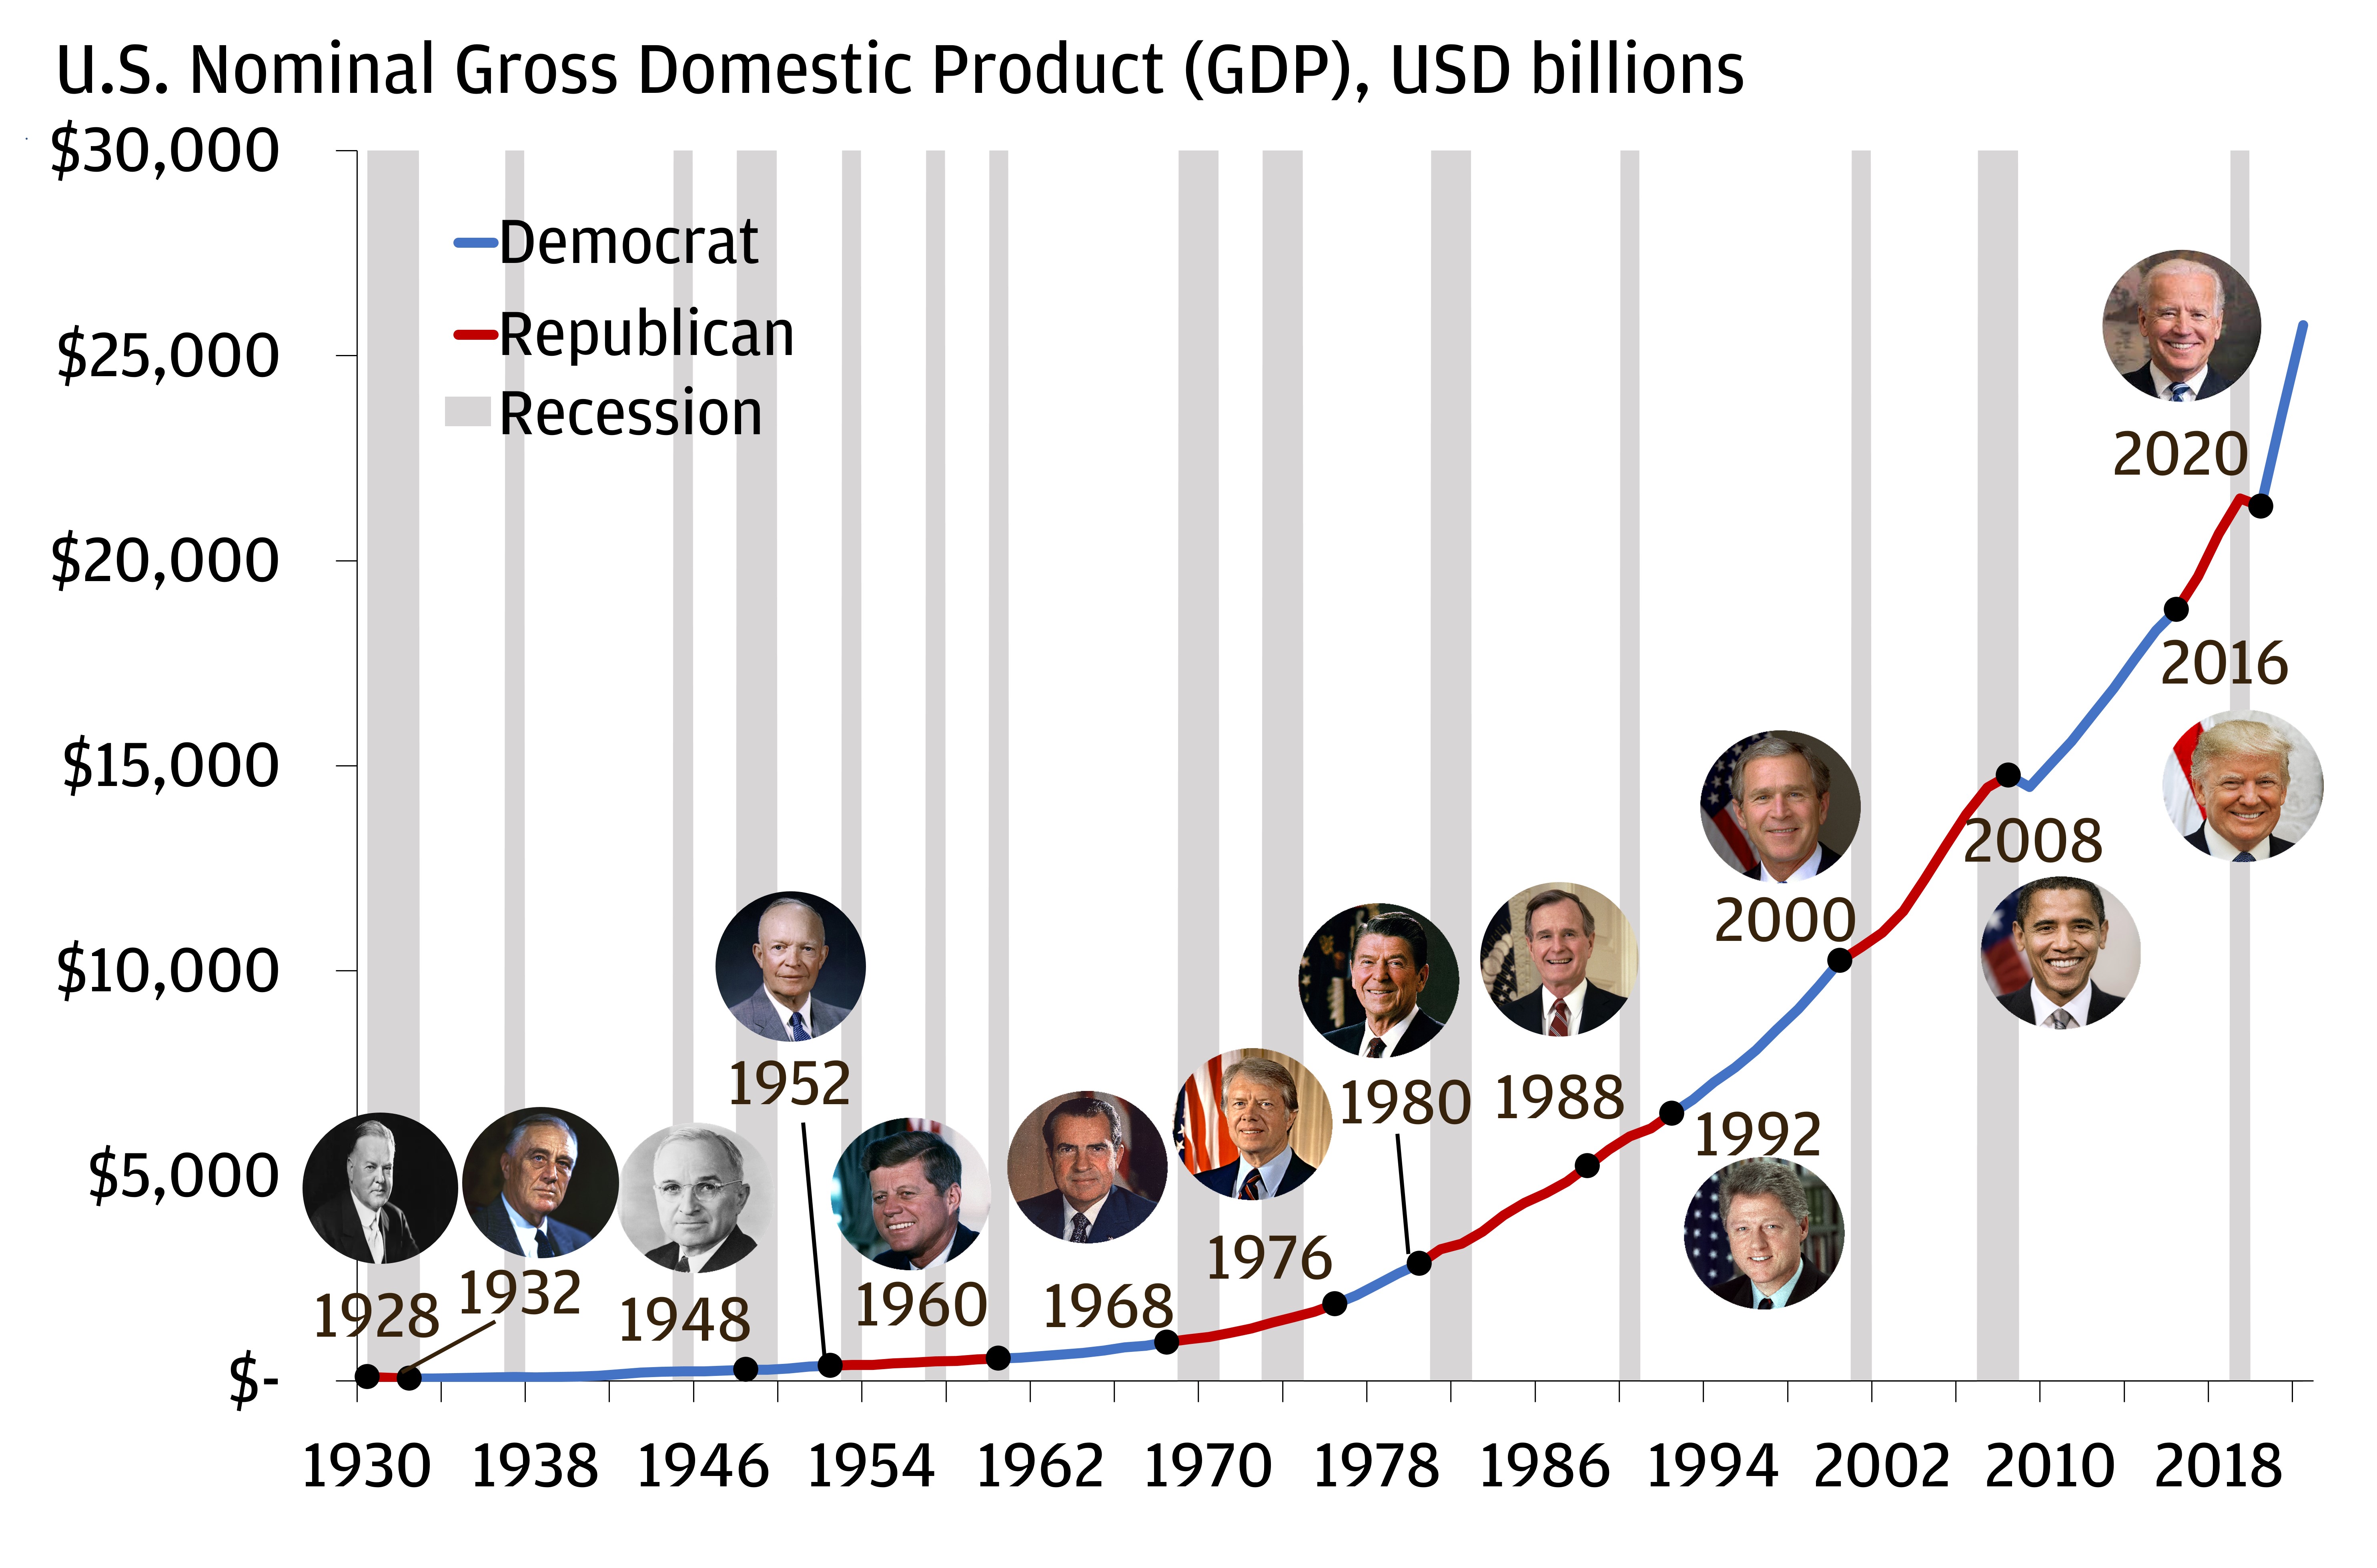 The chart shows U.S. National Gross Domestic Product in the United states as a line chart since 1930, with dots on the line representing U.S. presidential elections, the year they took place, and a picture of the winning candidate.